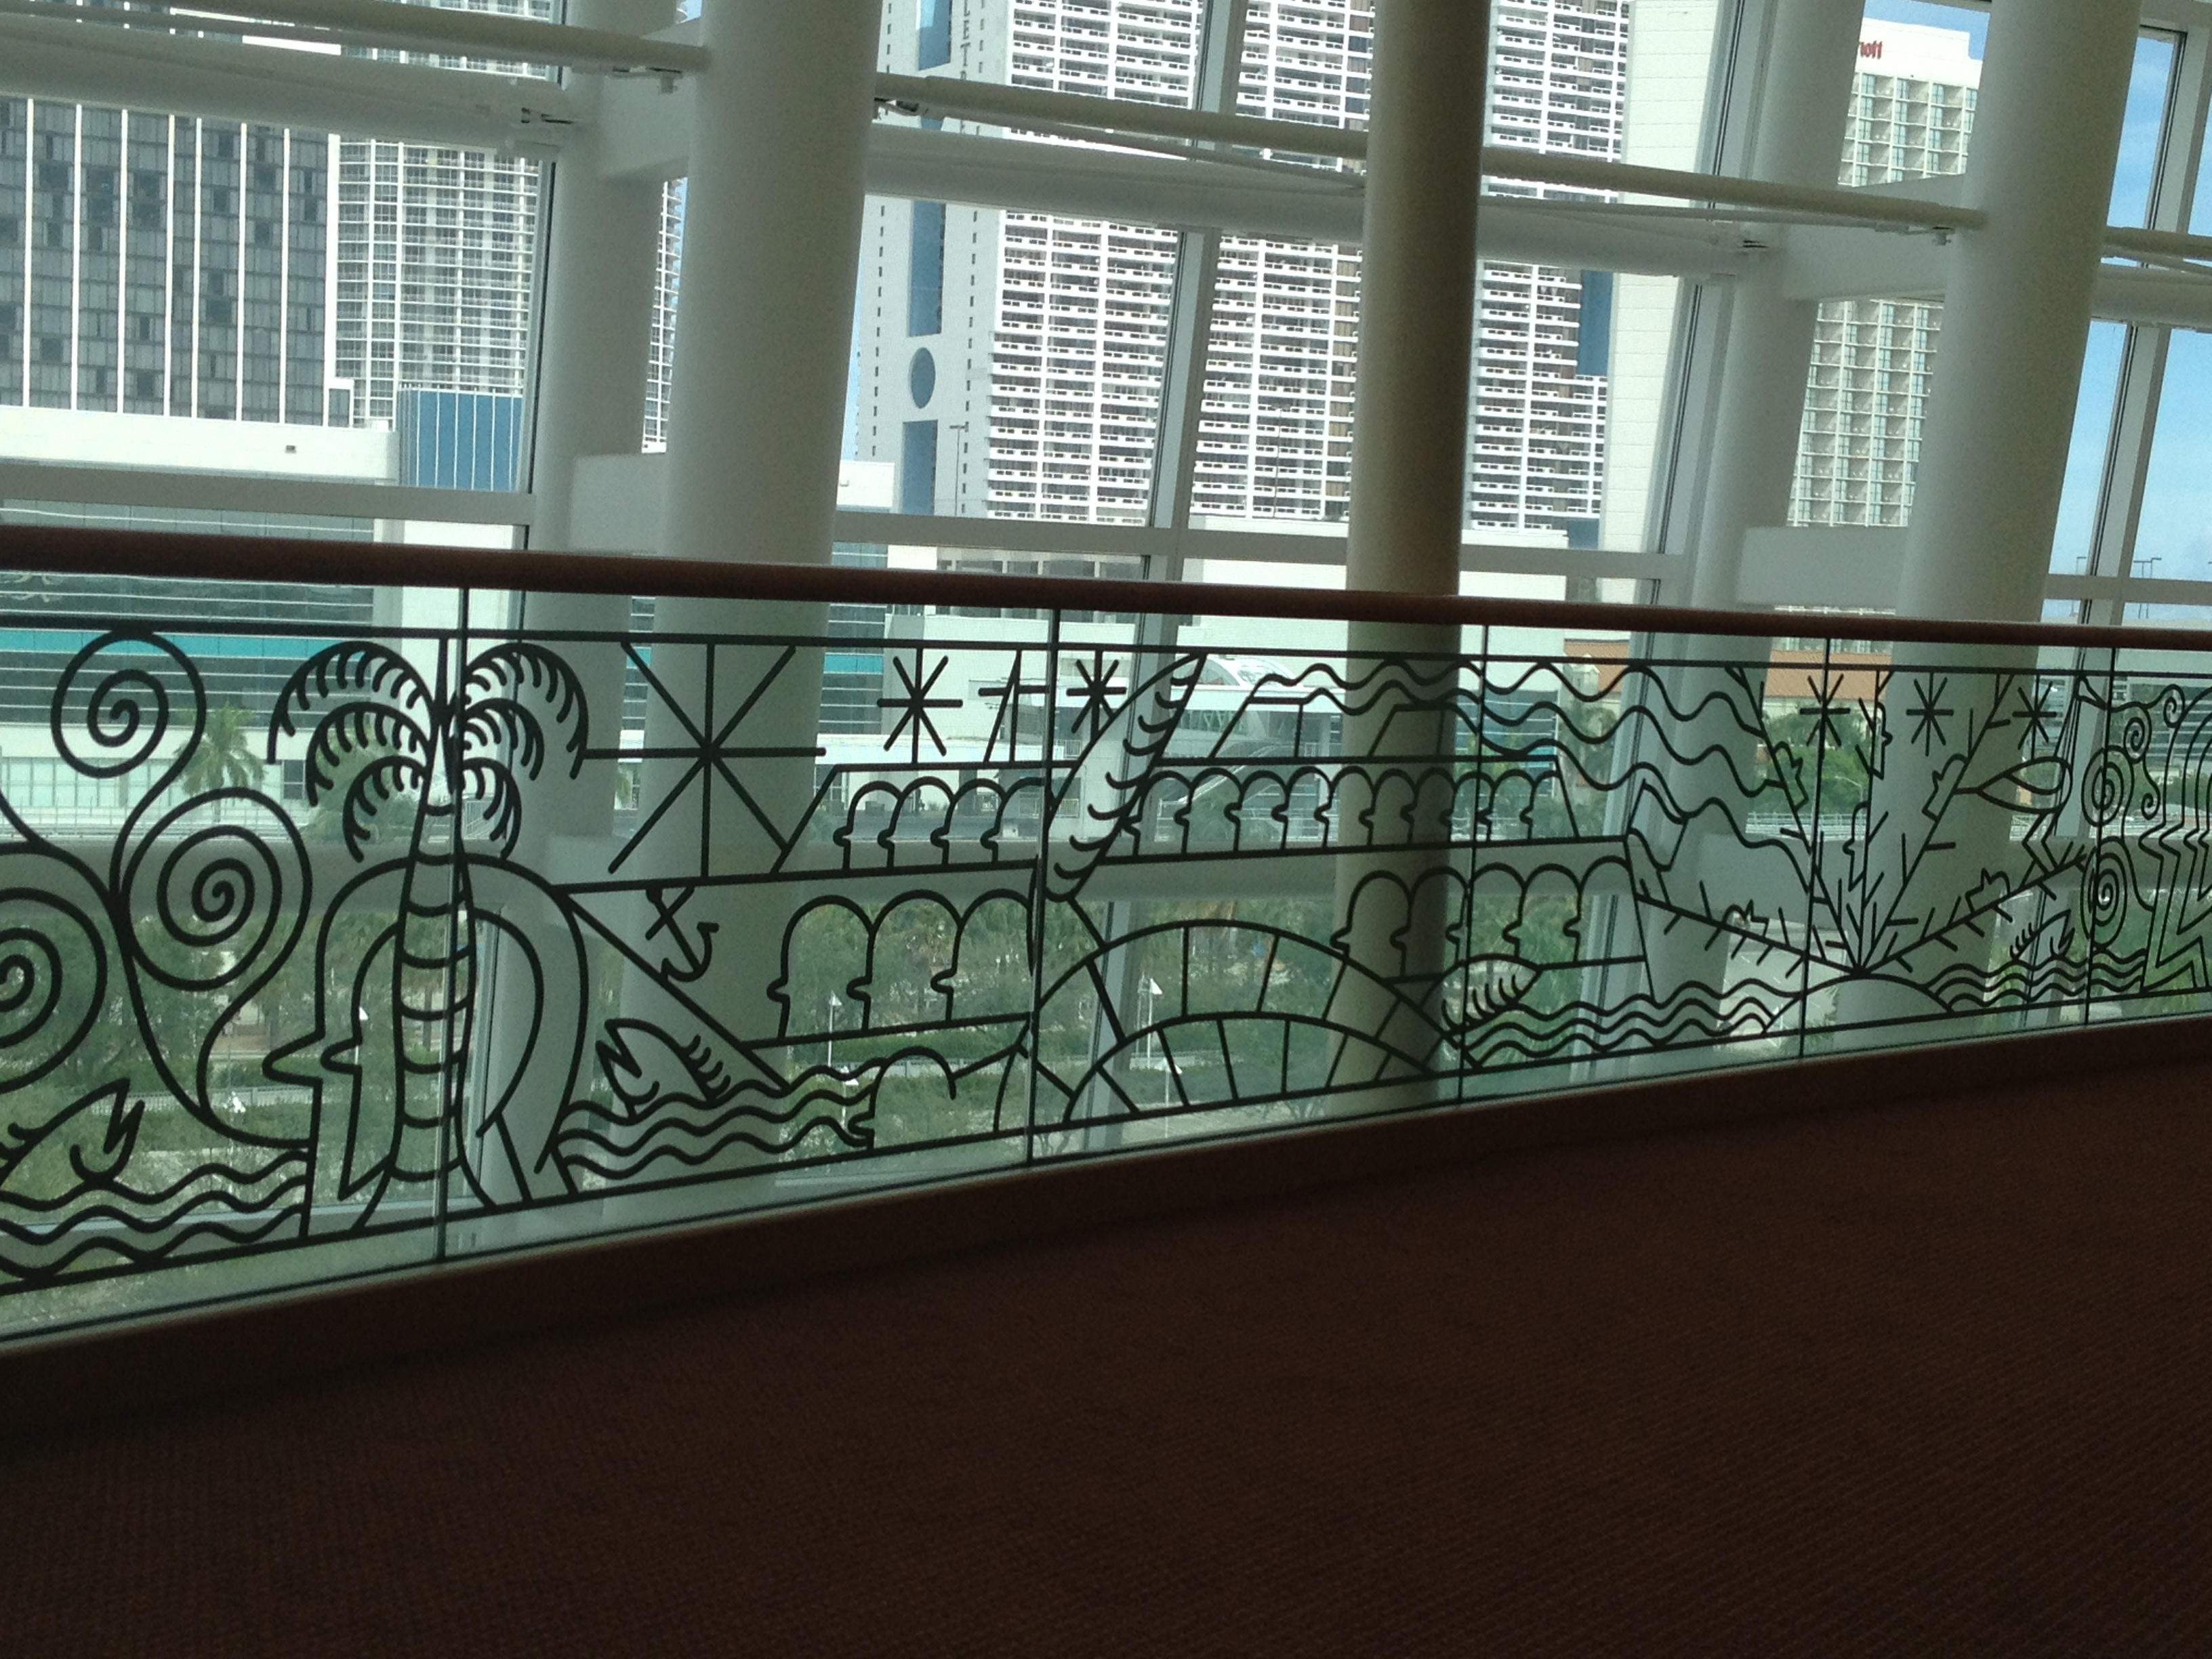 The glass railings of the Ziff Ballet Opera House designed by José Bedia (Photo by Emma Reyes).